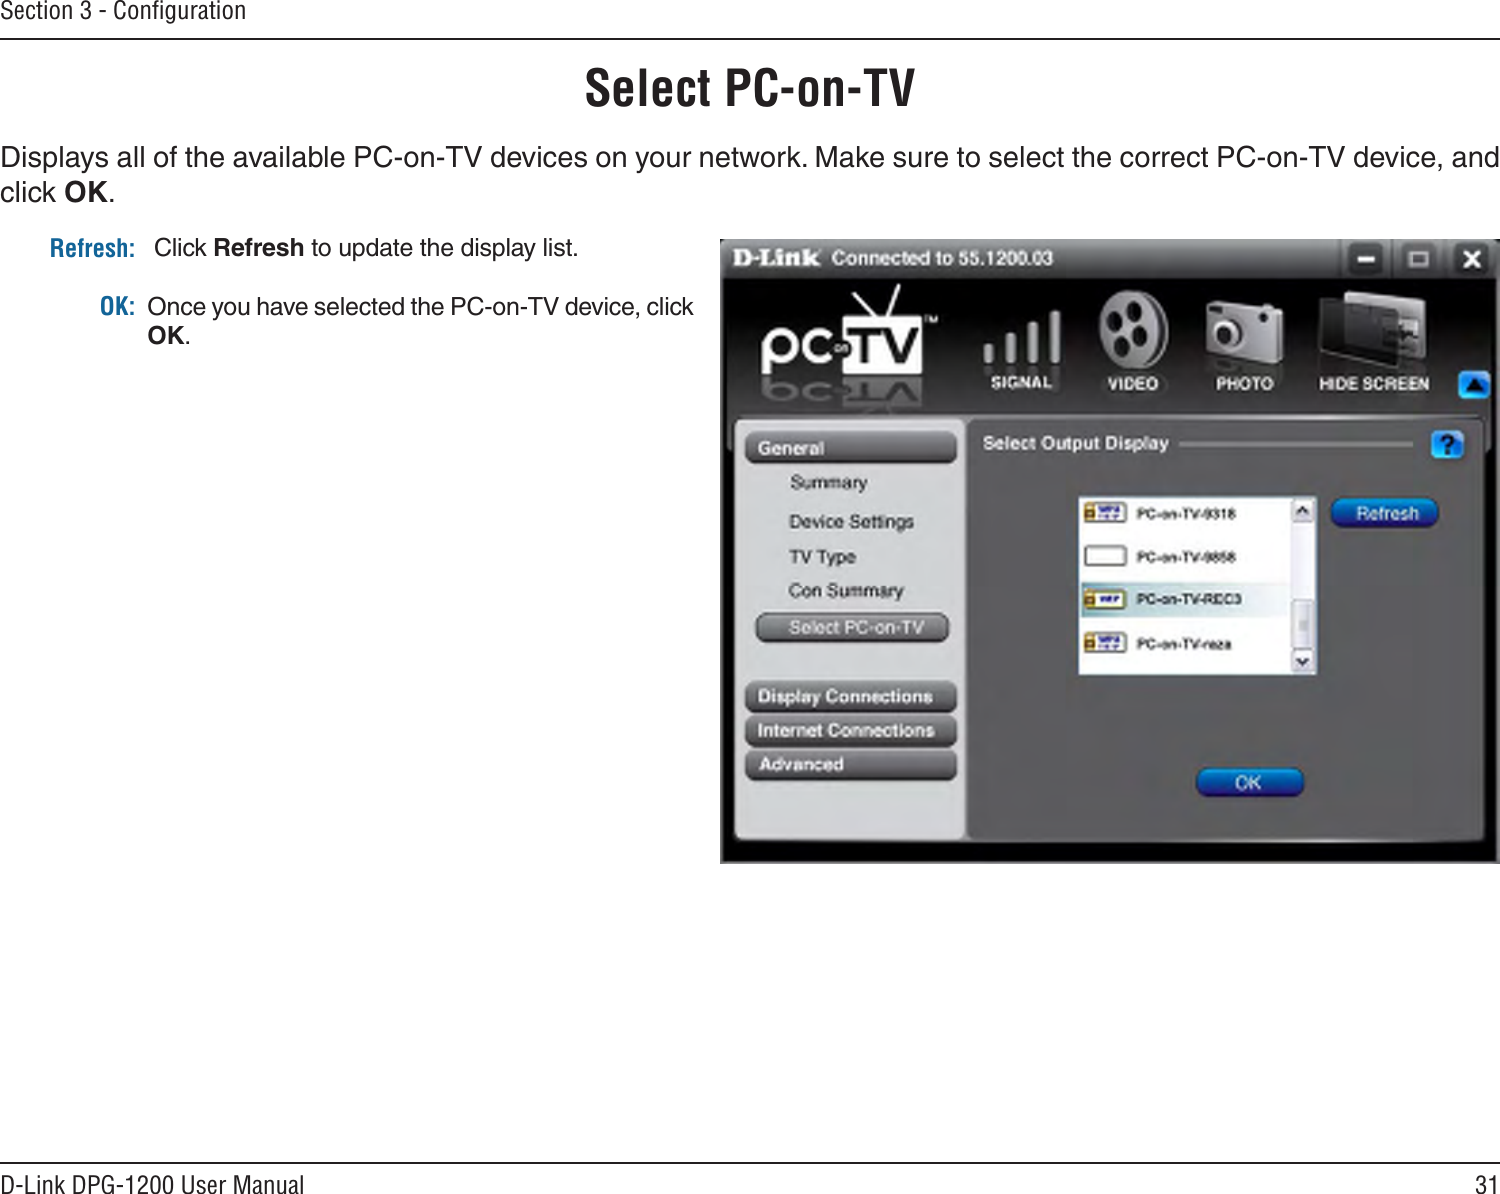 31D-Link DPG-1200 User ManualSection 3 - ConﬁgurationRefresh:OK: Click Refresh to update the display list.Once you have selected the PC-on-TV device, click OK.Select PC-on-TVDisplays all of the available PC-on-TV devices on your network. Make sure to select the correct PC-on-TV device, and click OK.